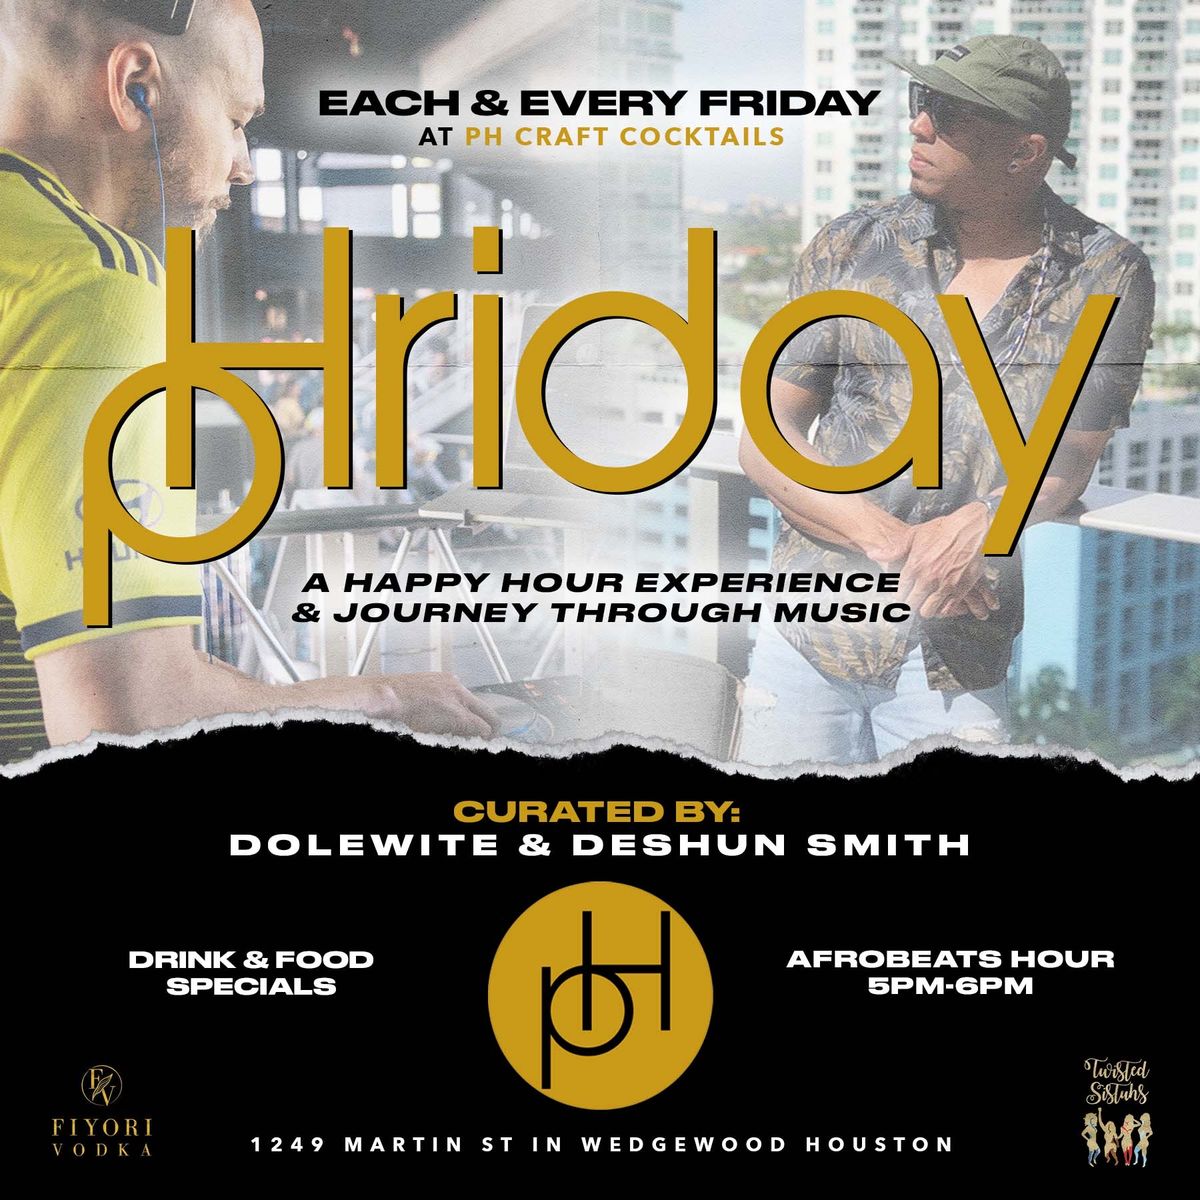 pHriday: A Happy Hour Experience and Journey Through Music